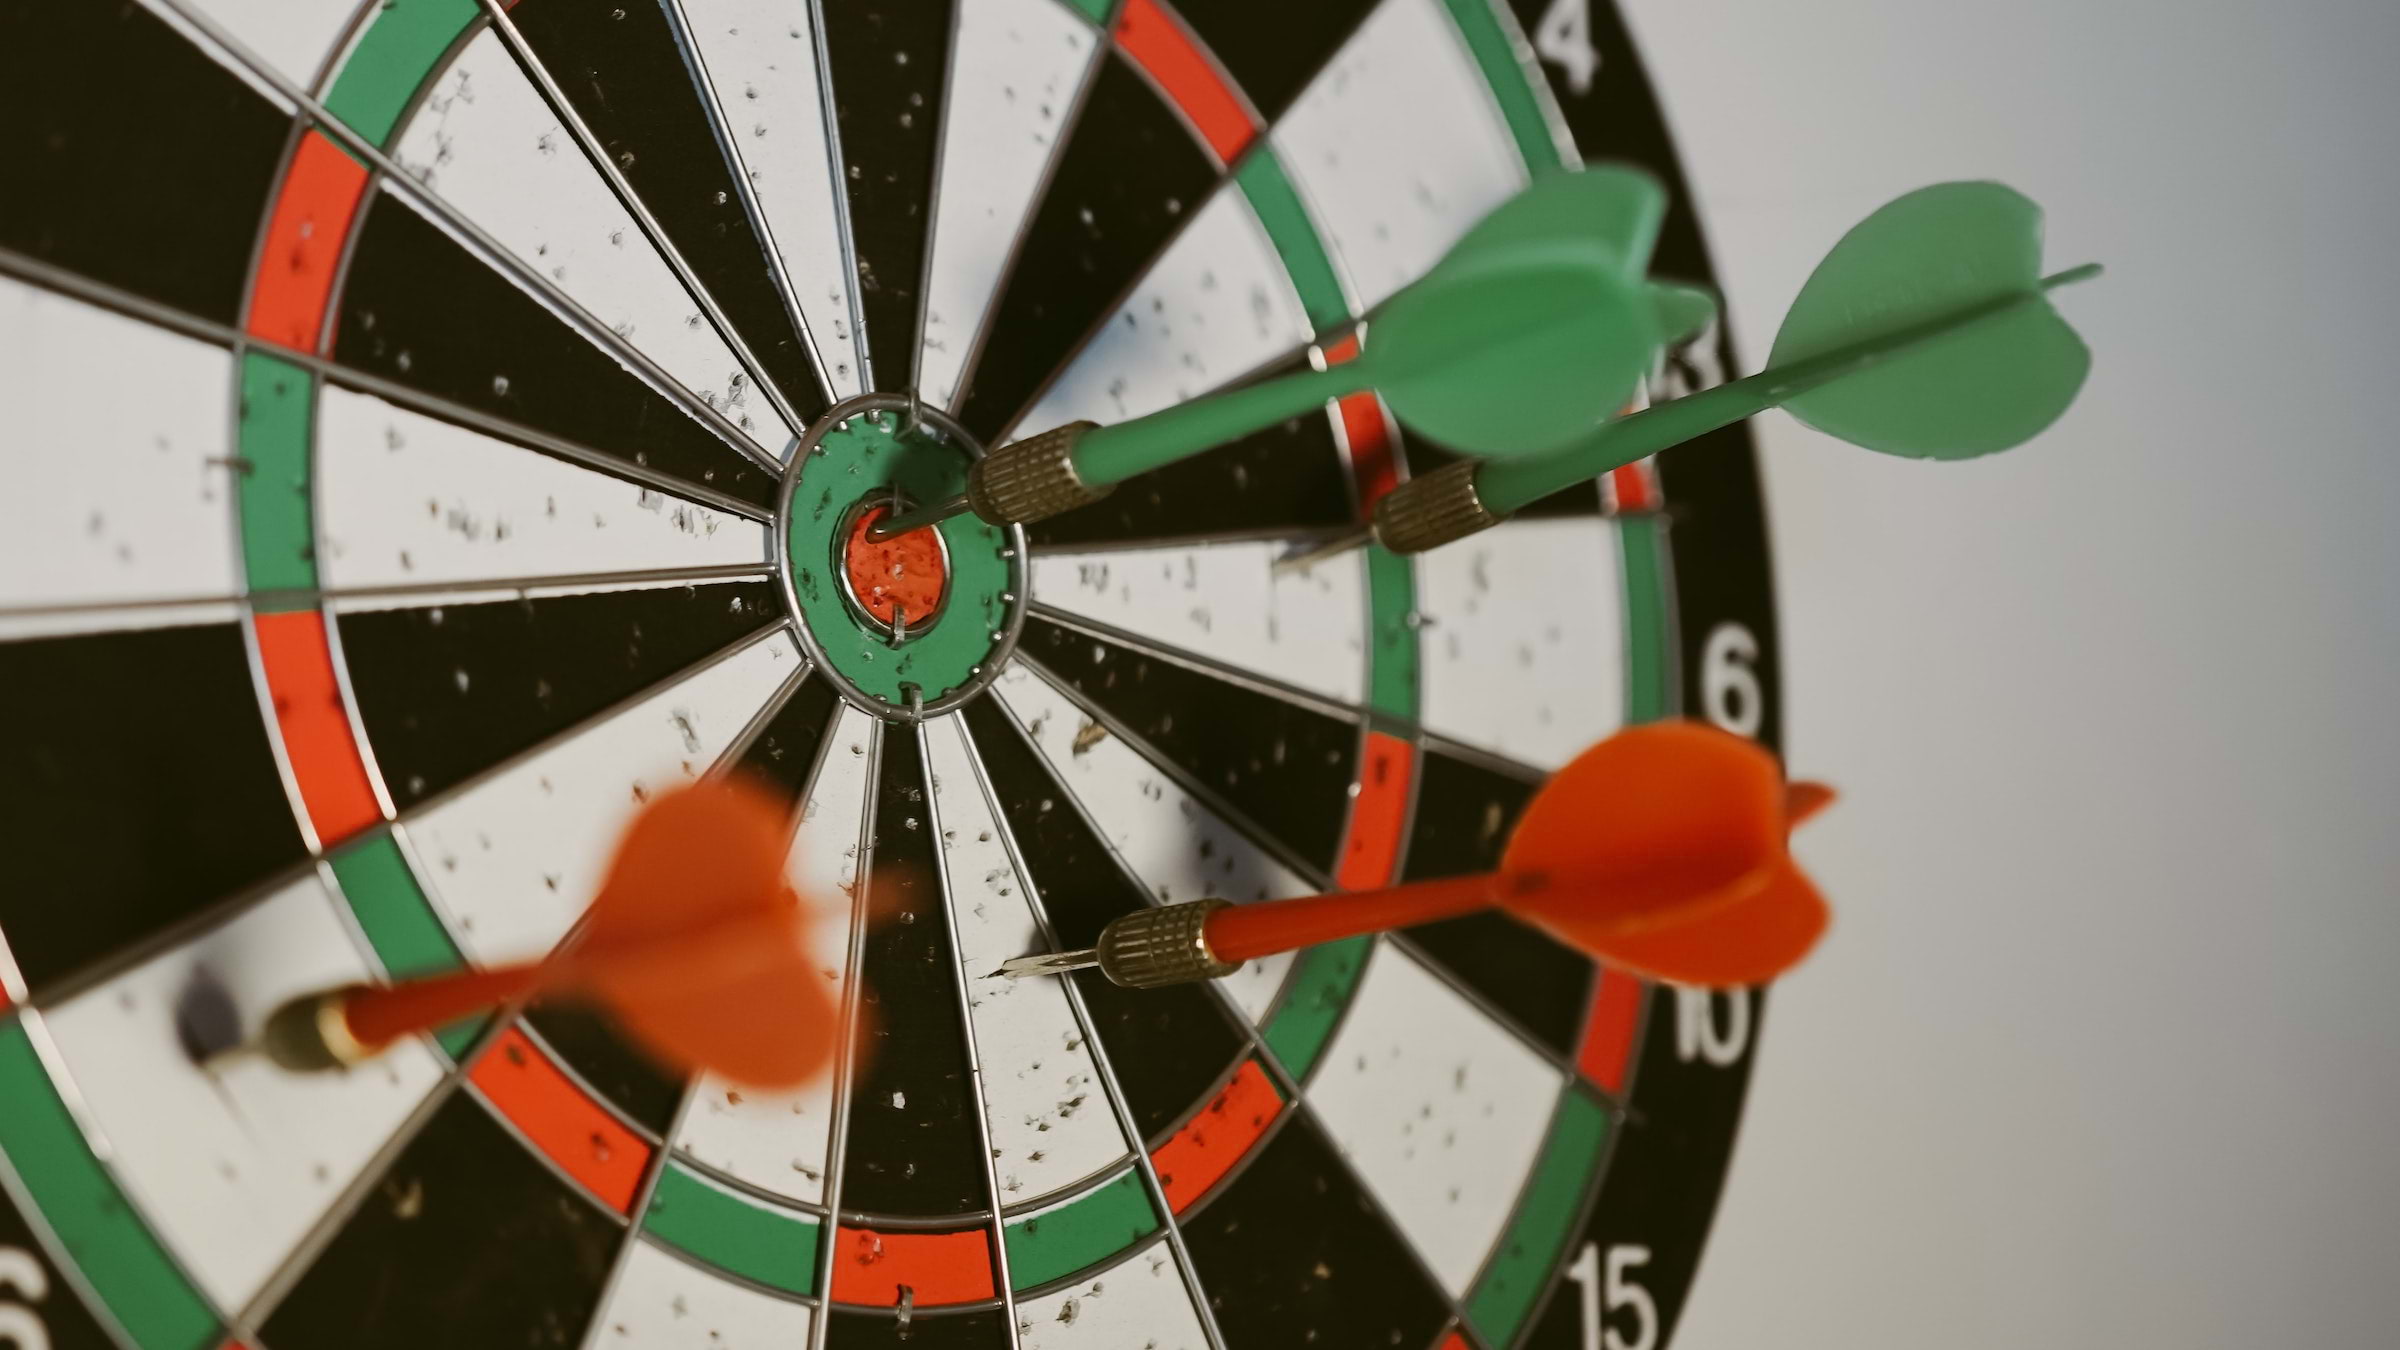 Where to play darts in London